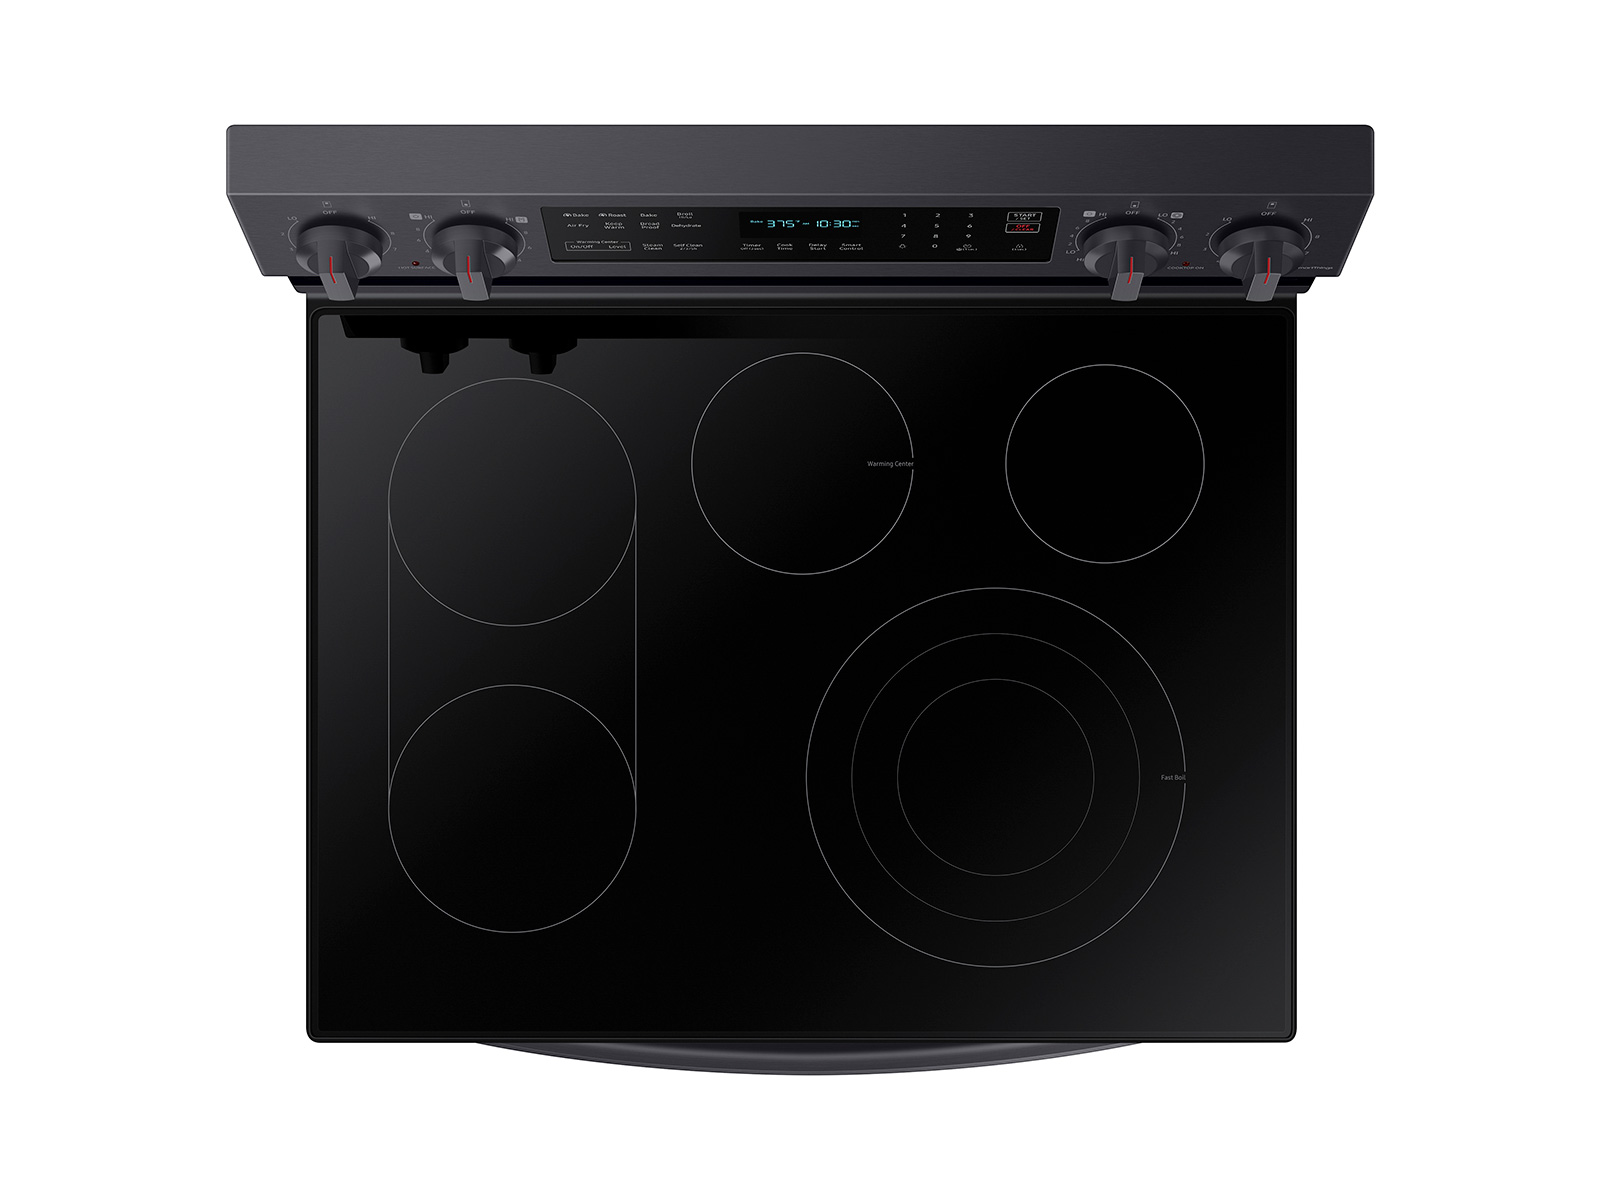 NE63A6711SG Samsung 6.3 cu. ft. Smart Freestanding Electric Range with  No-Preheat Air Fry, Convection+ & Griddle in Black Stainless Steel